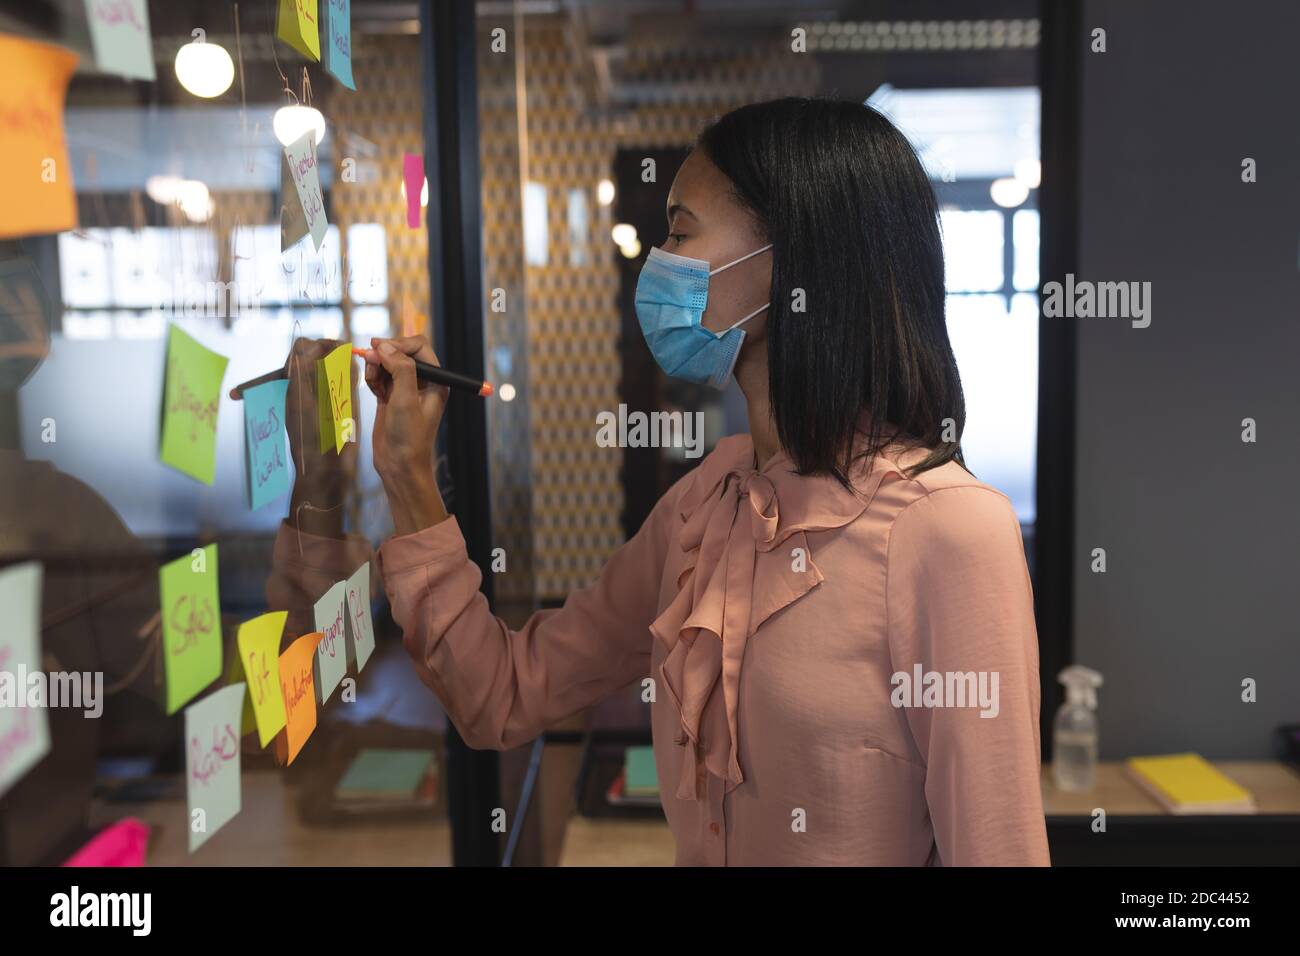 Asian woman wearing face mask writing with marker pen on glass board at modern office Stock Photo